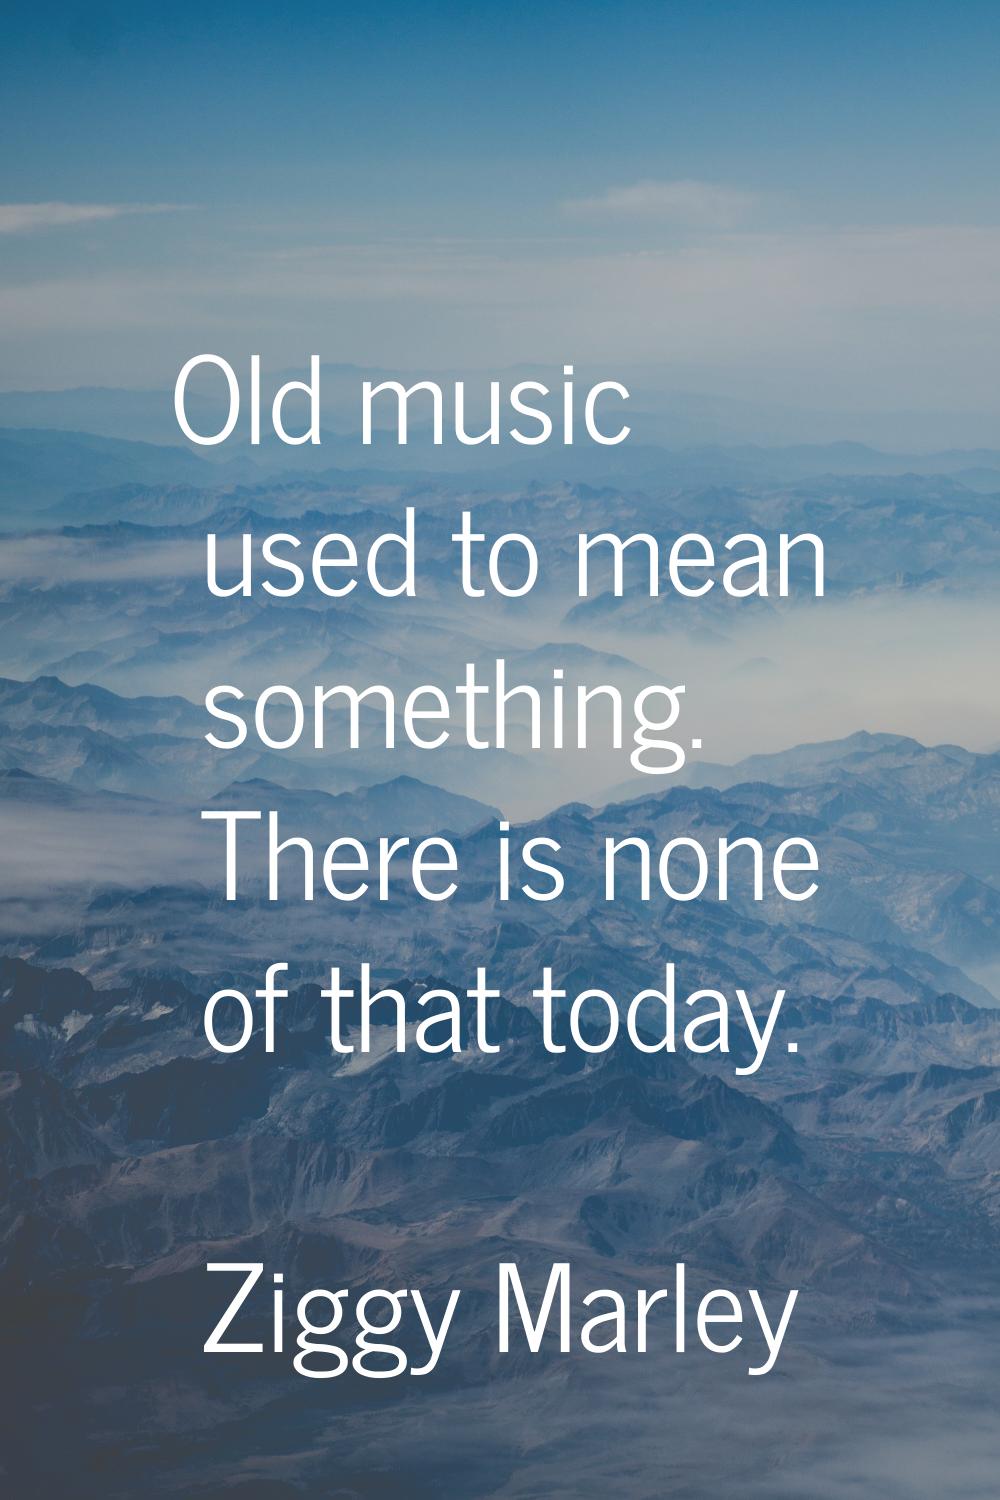 Old music used to mean something. There is none of that today.